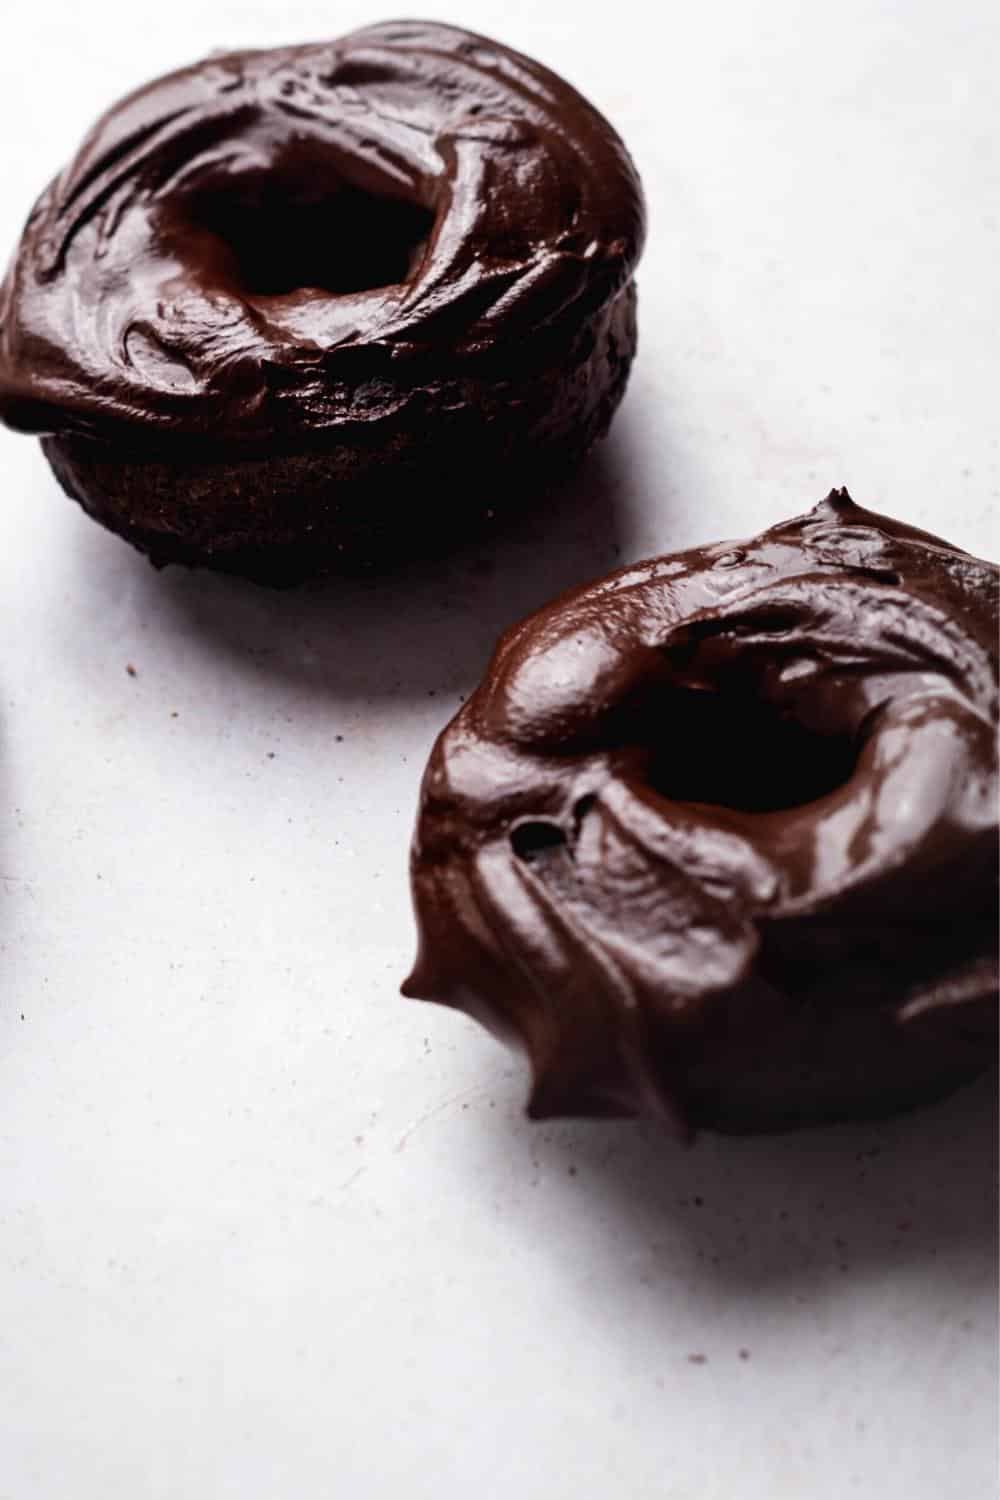 Chocolate glazed protein donuts on a white counter.